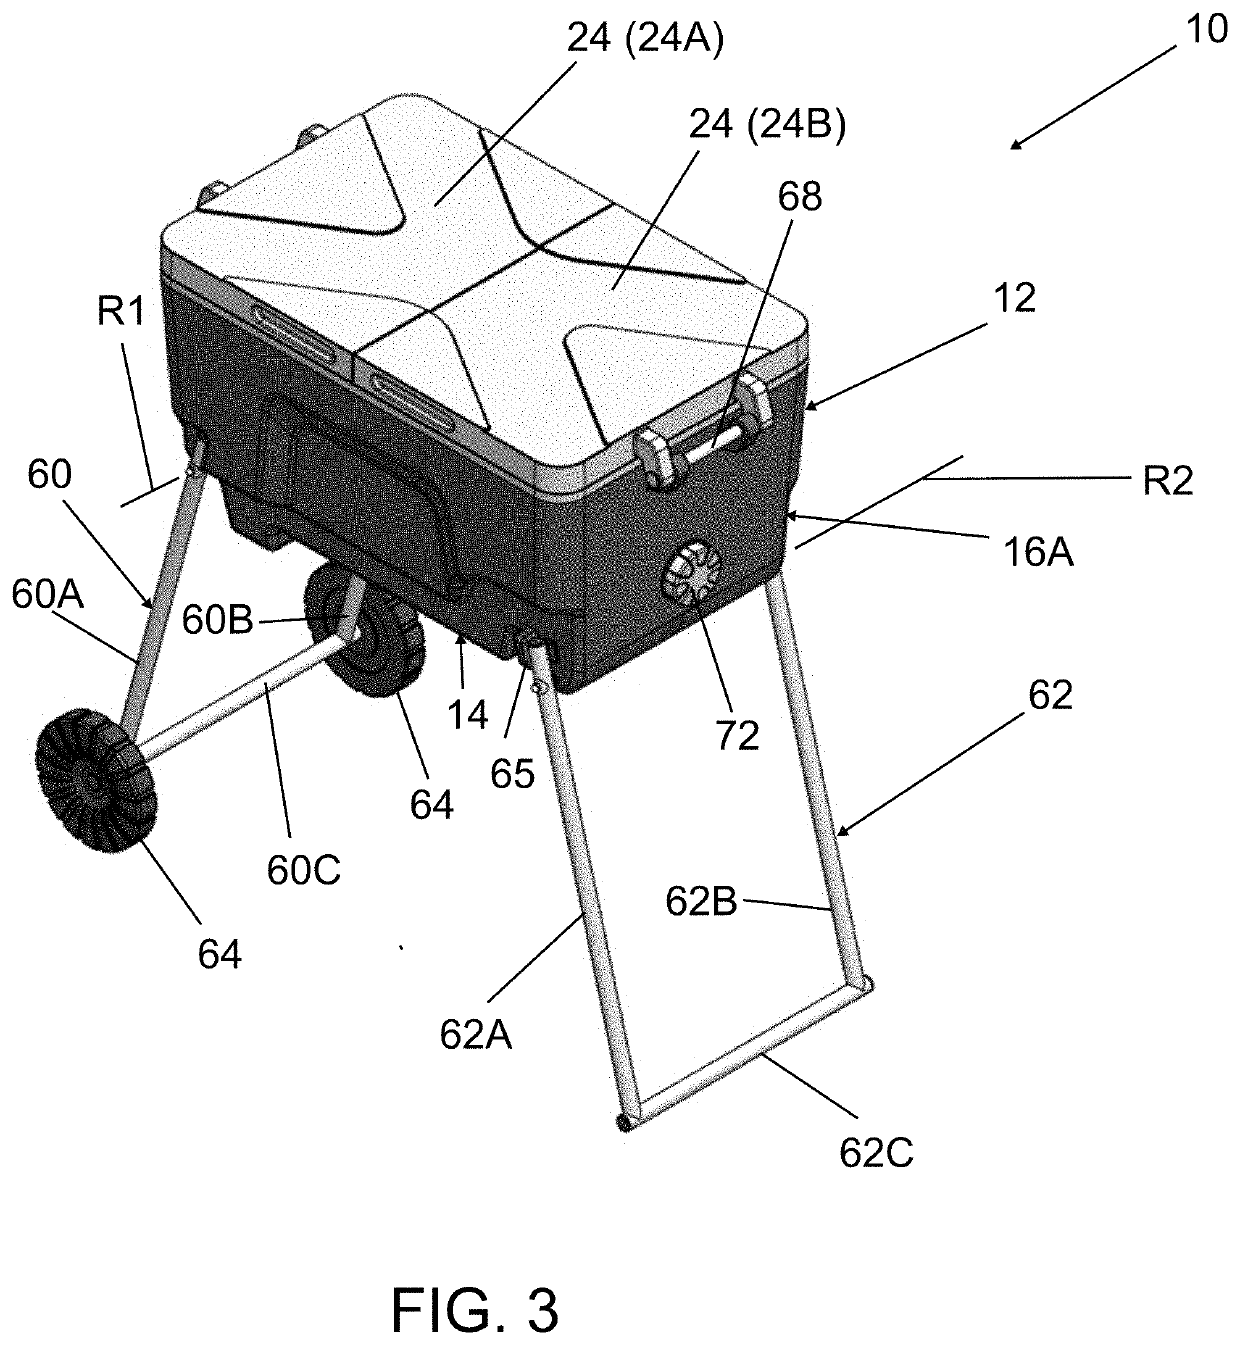 Portable rigid cooler and beverage dispenser with legs that extend and retract